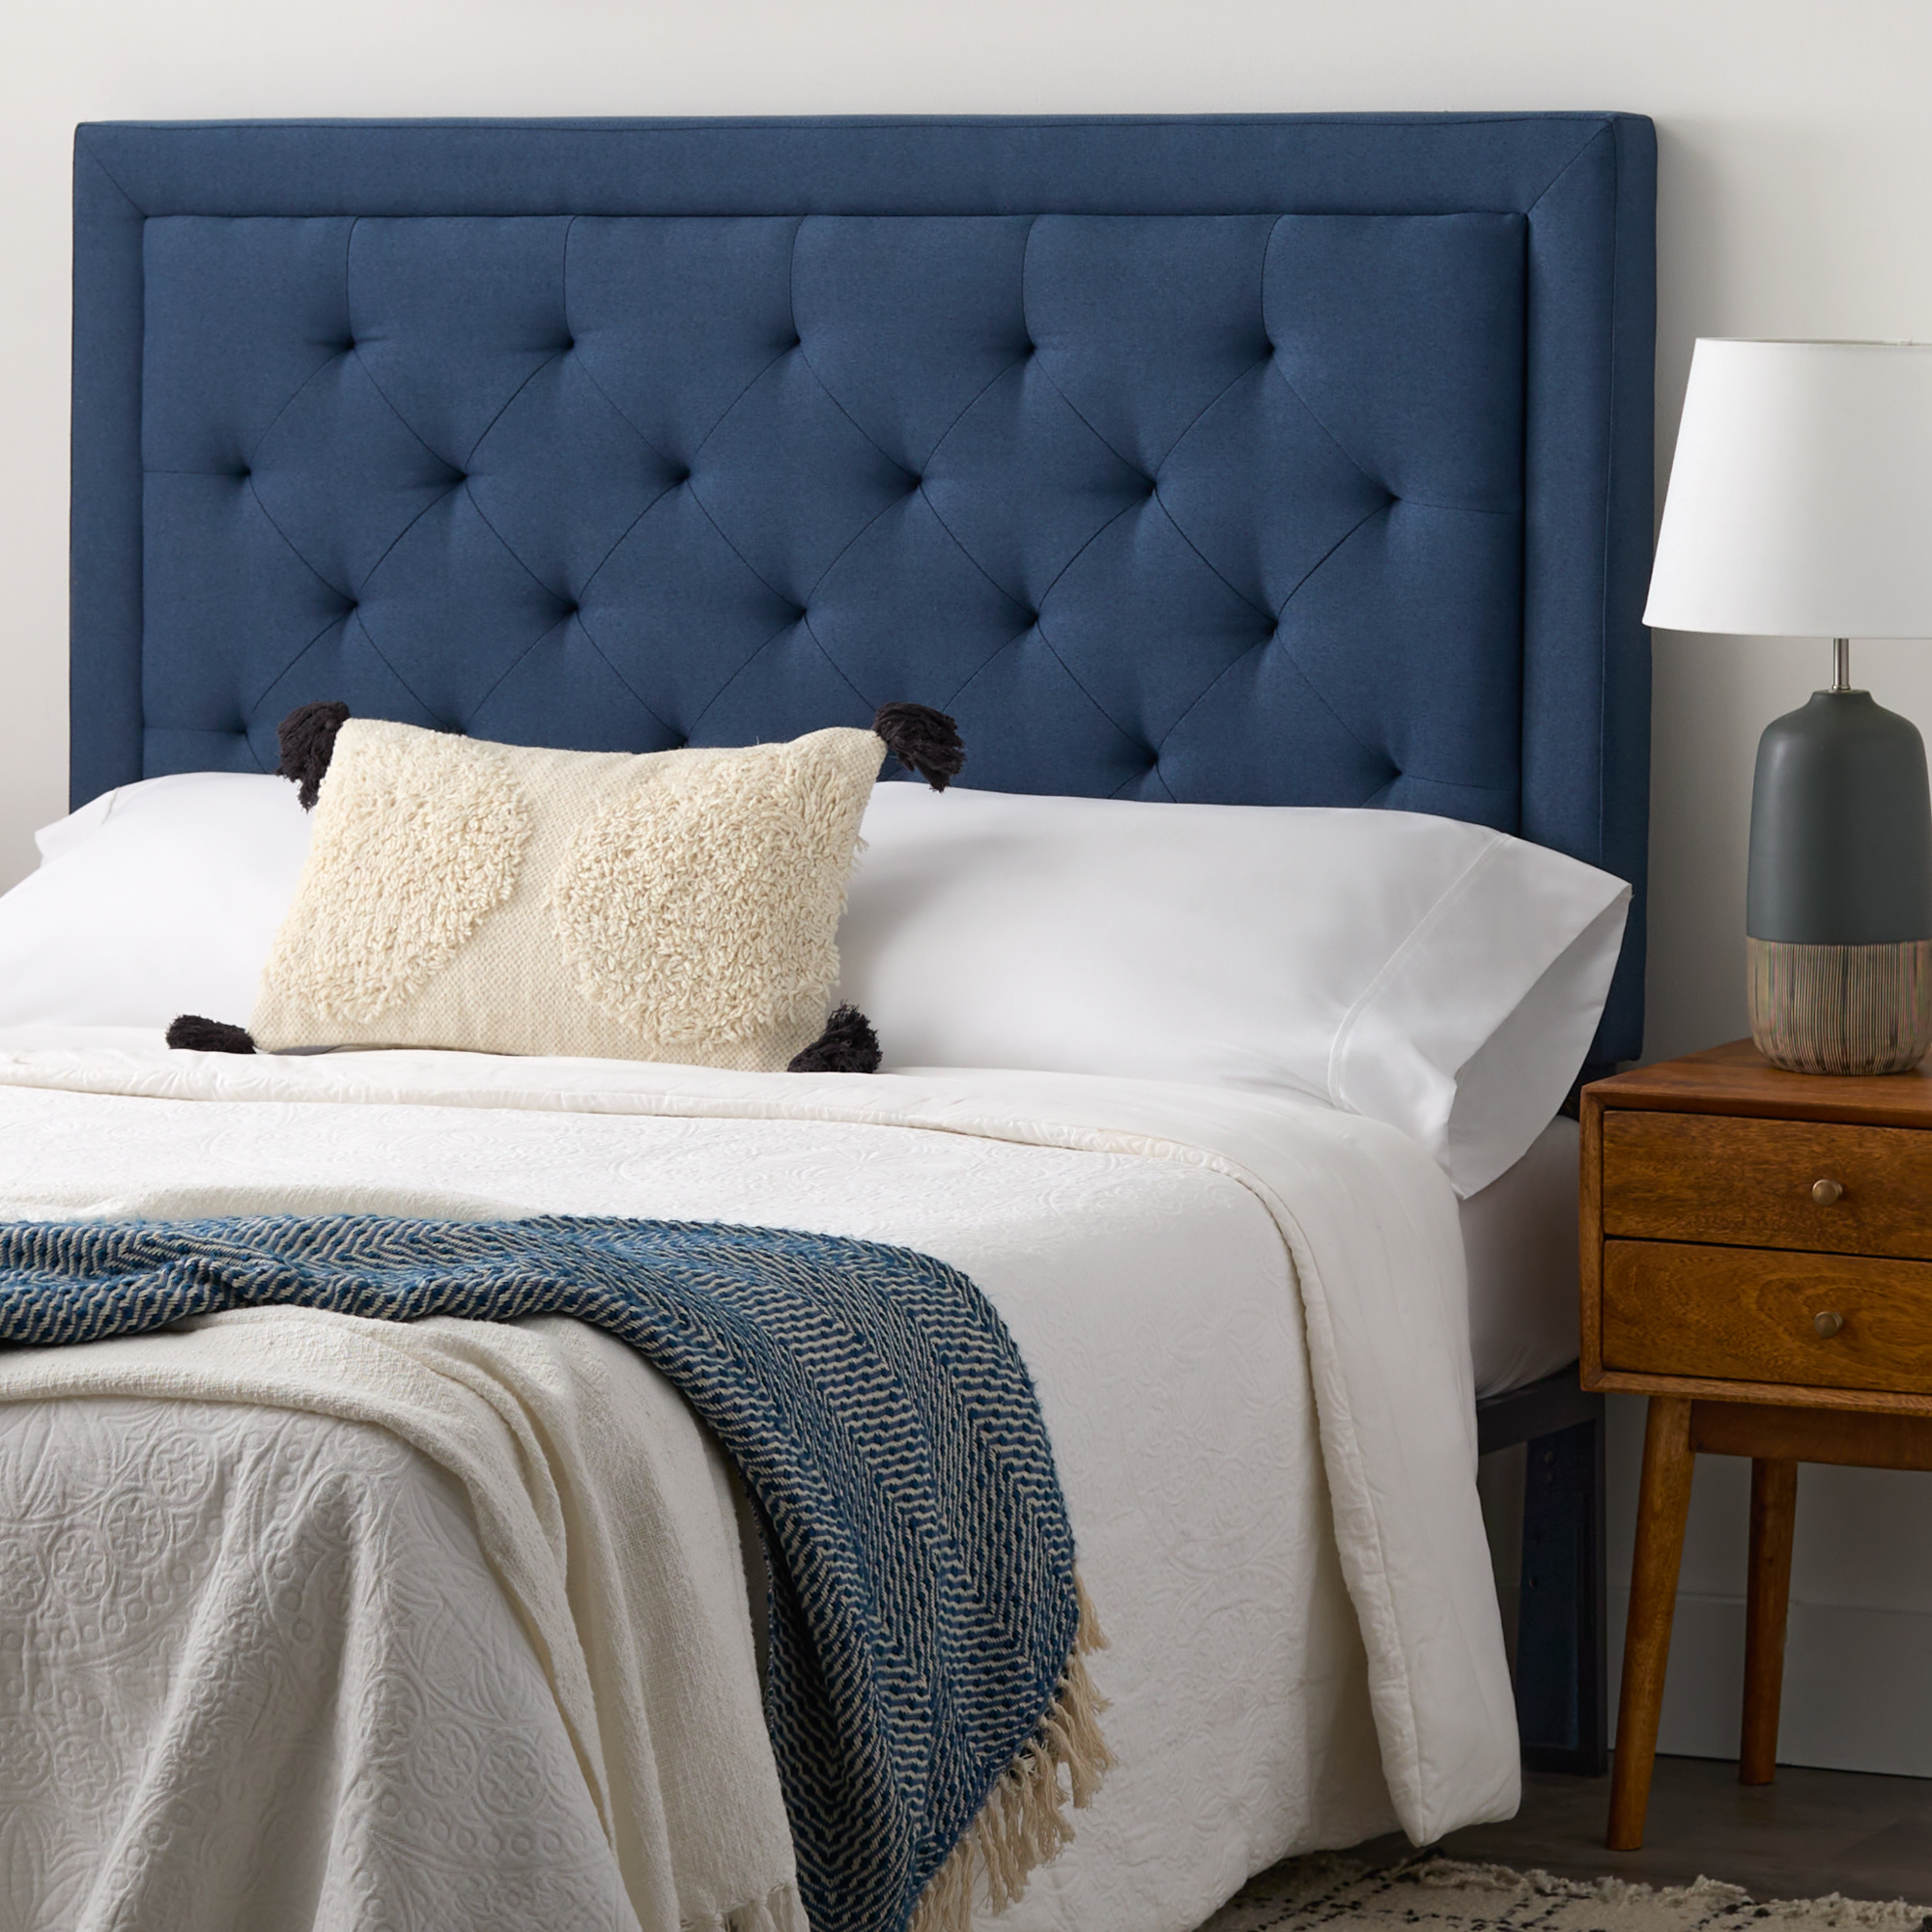 Rest Haven Medford Rectangle Upholstered Headboard with Diamond Tufting, Queen, Navy - image 1 of 11